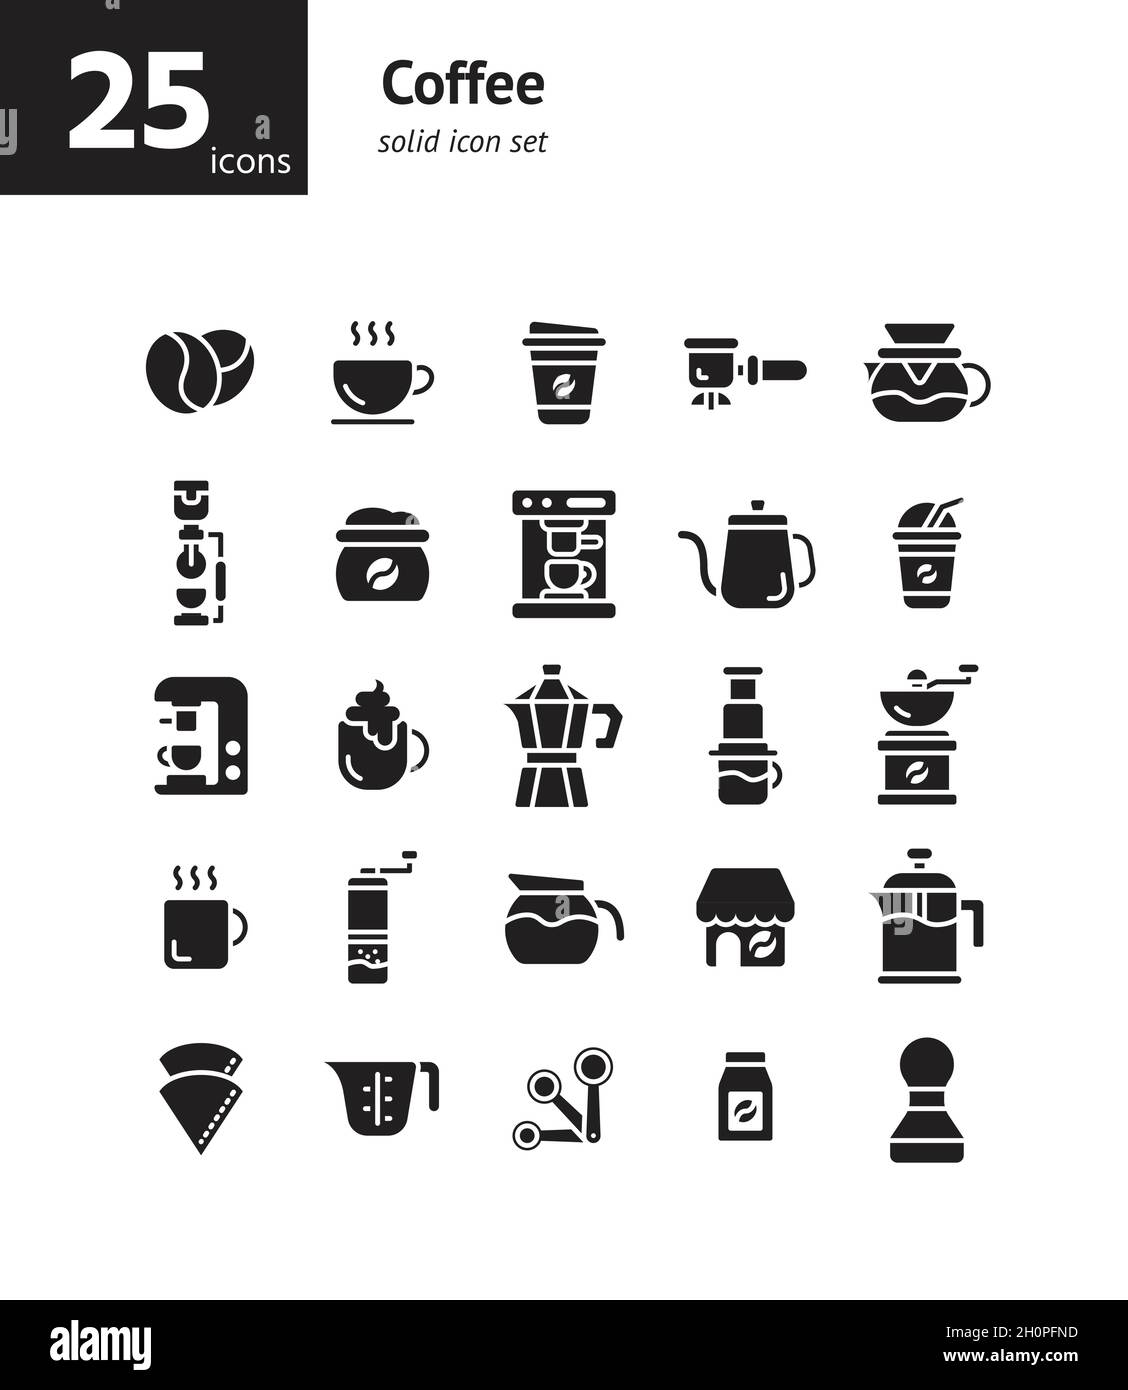 Coffee solid icon set. Vector and Illustration. Stock Vector